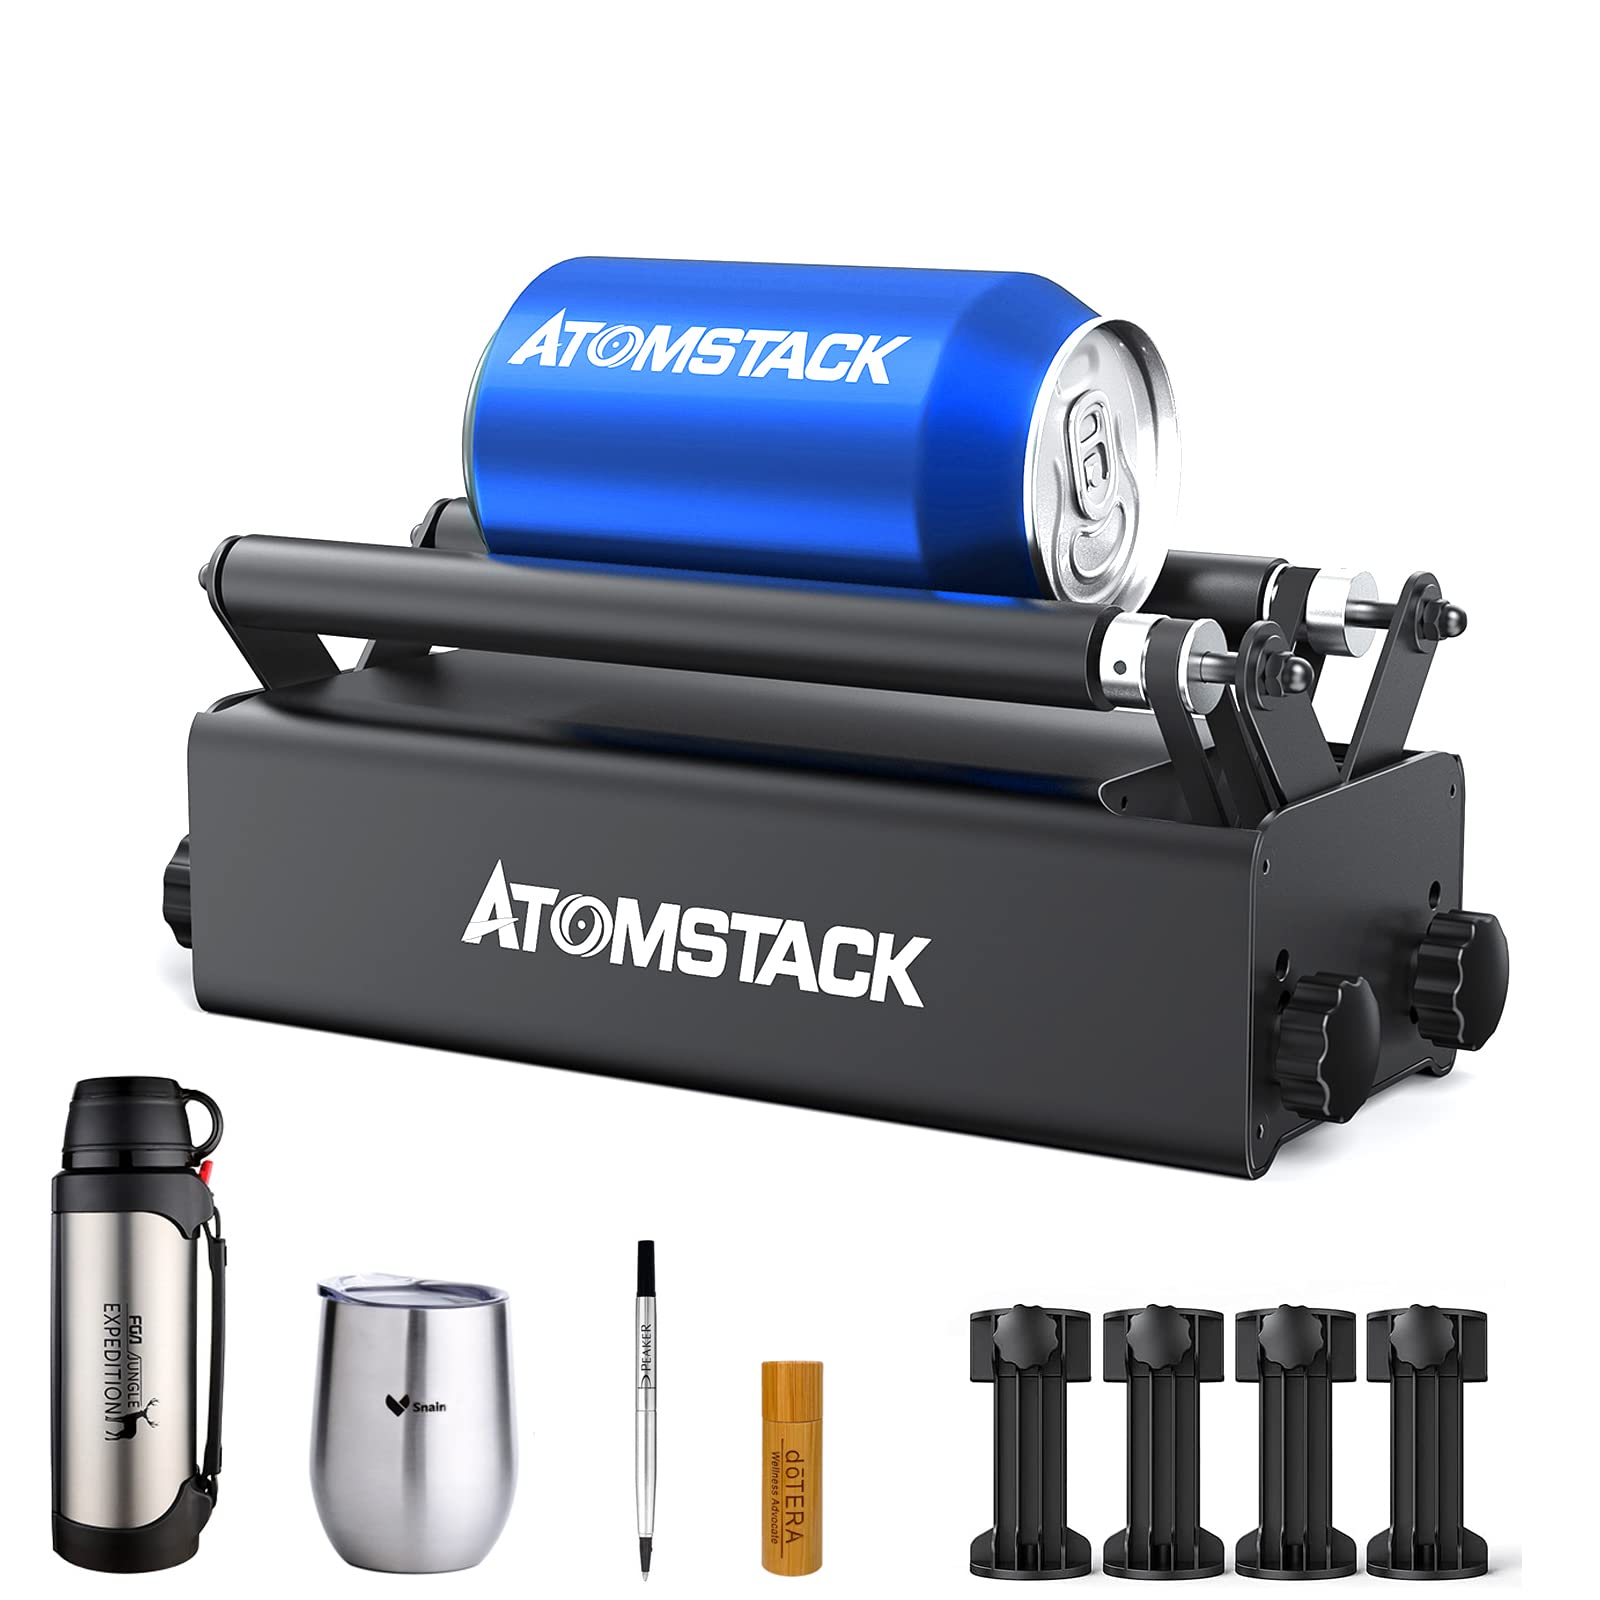 Atomstack R3 Laser Engraver Rotary Roller, Laser Engraver Y-Axis Rotary Roller Engraving Module For Engraving Cylindrical Object